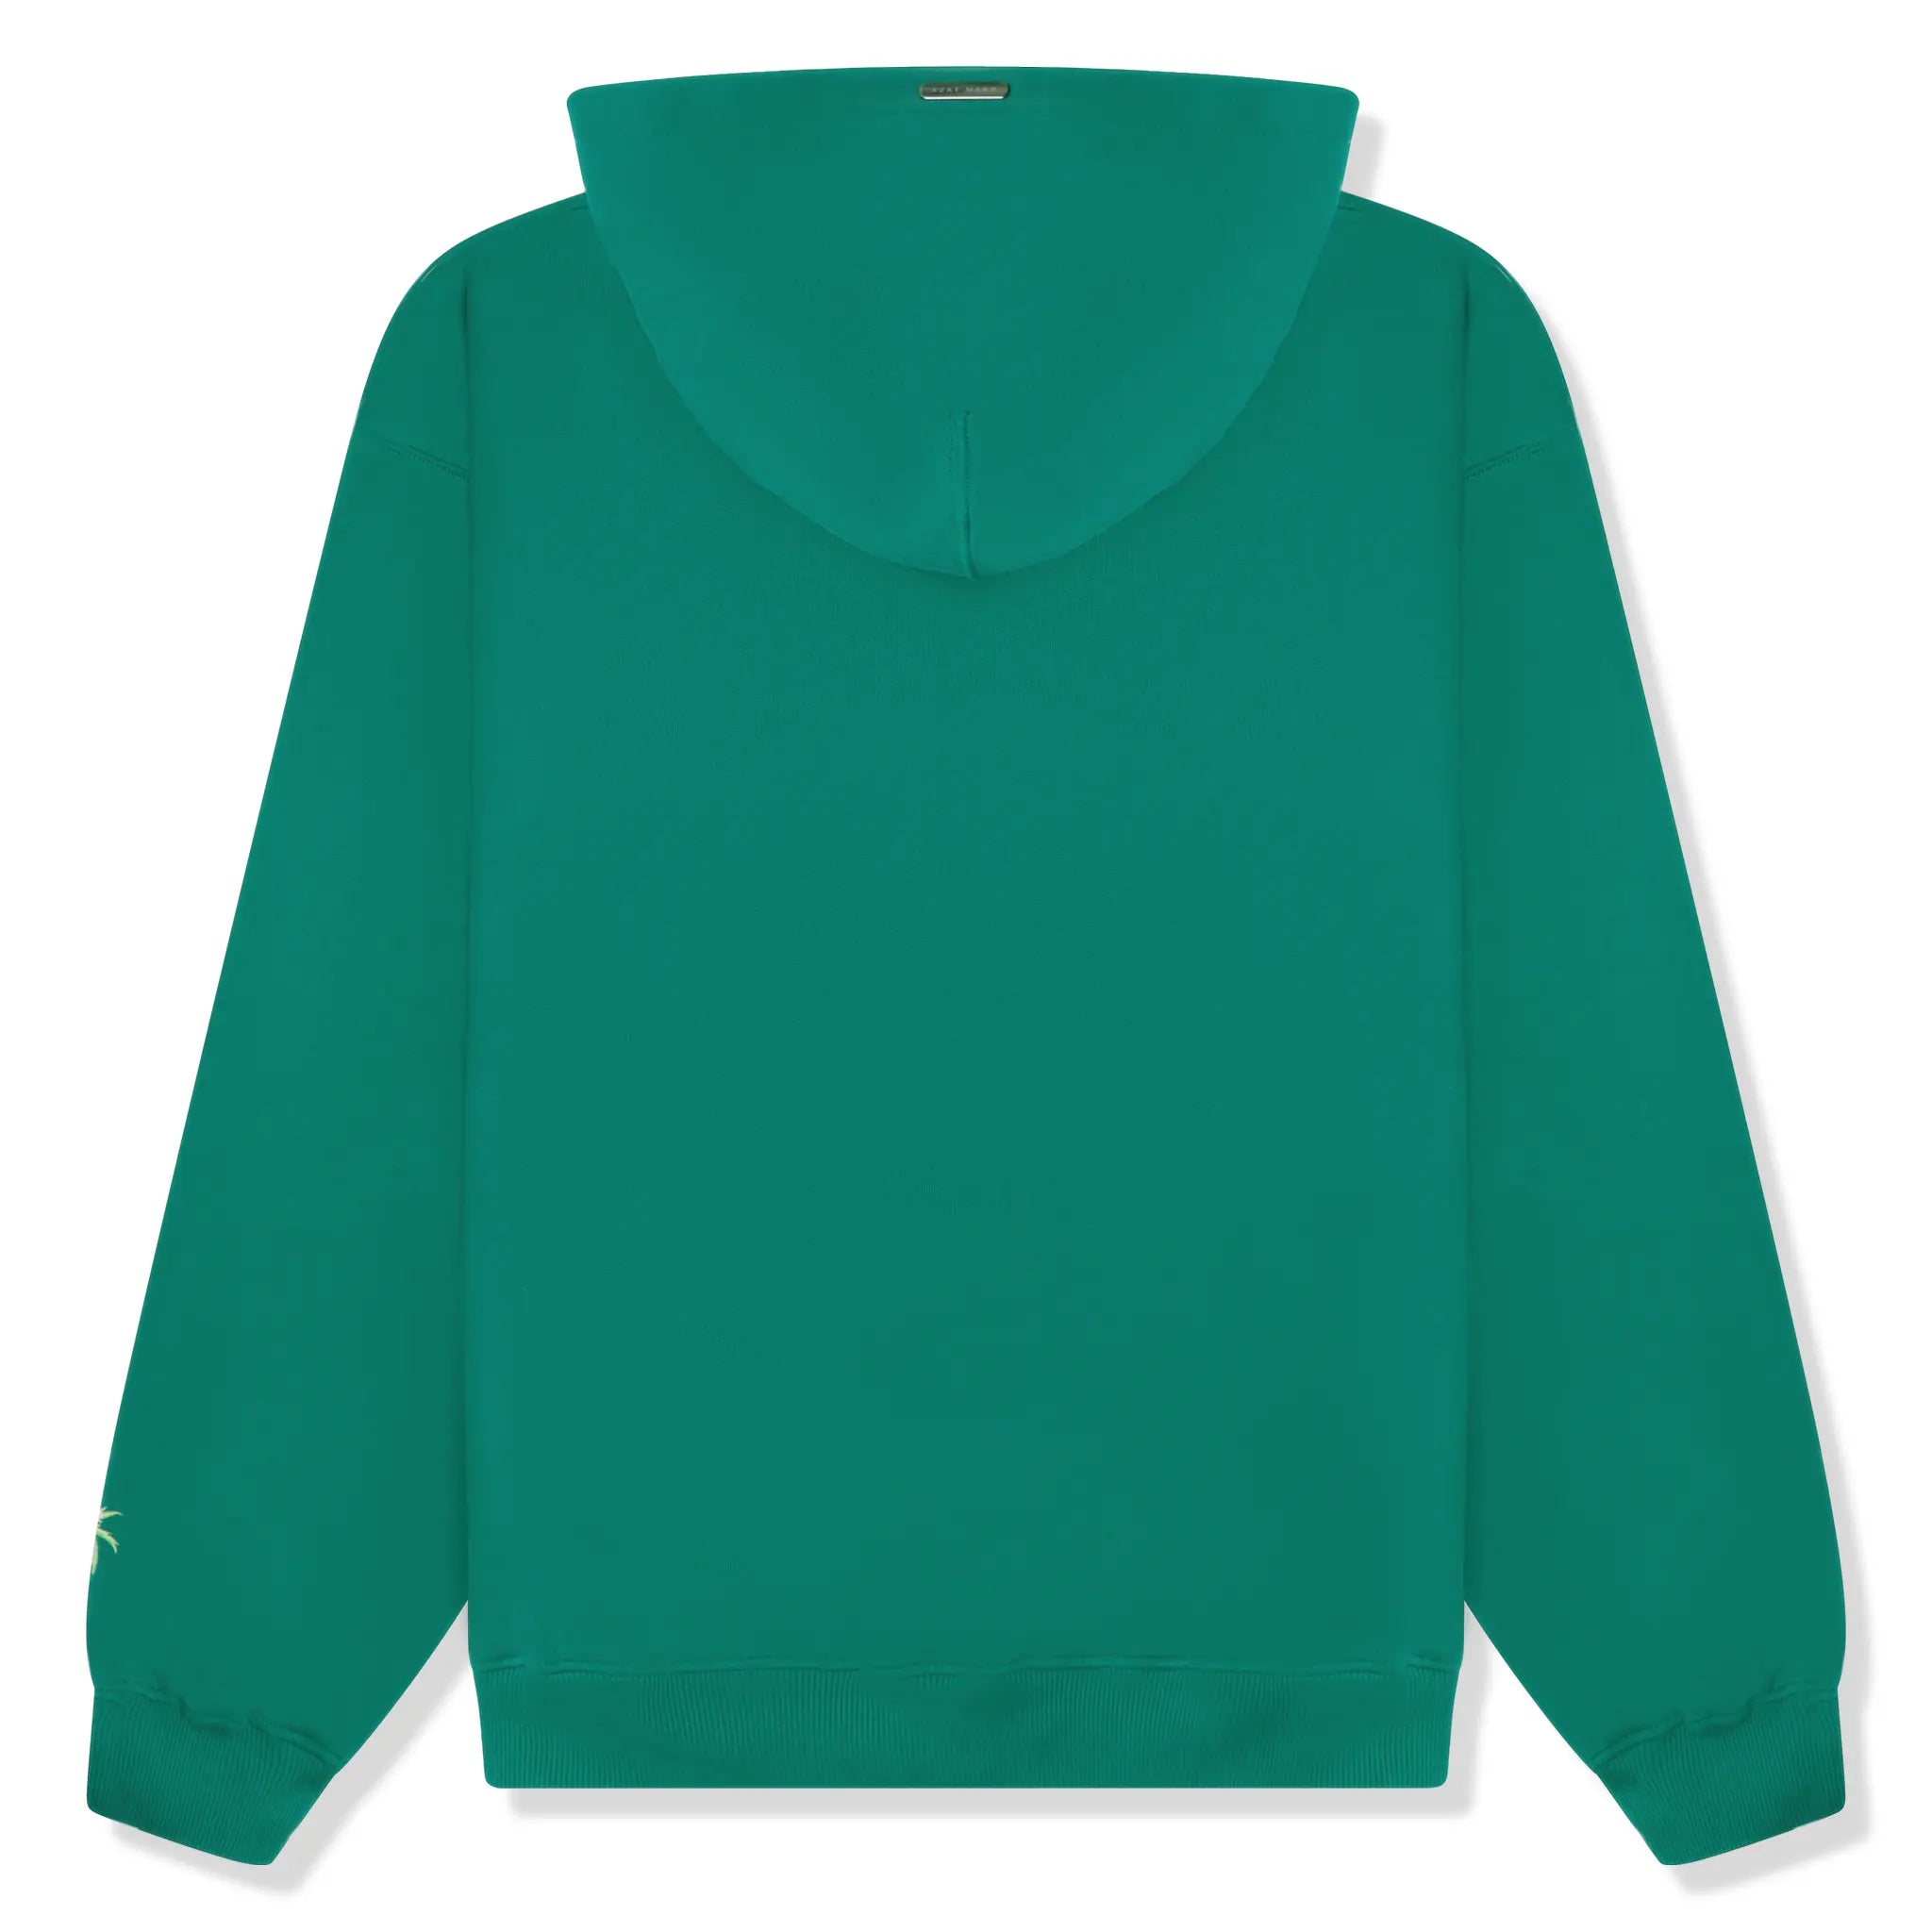 Back view of Azat Mard Country Club Green Hoodie